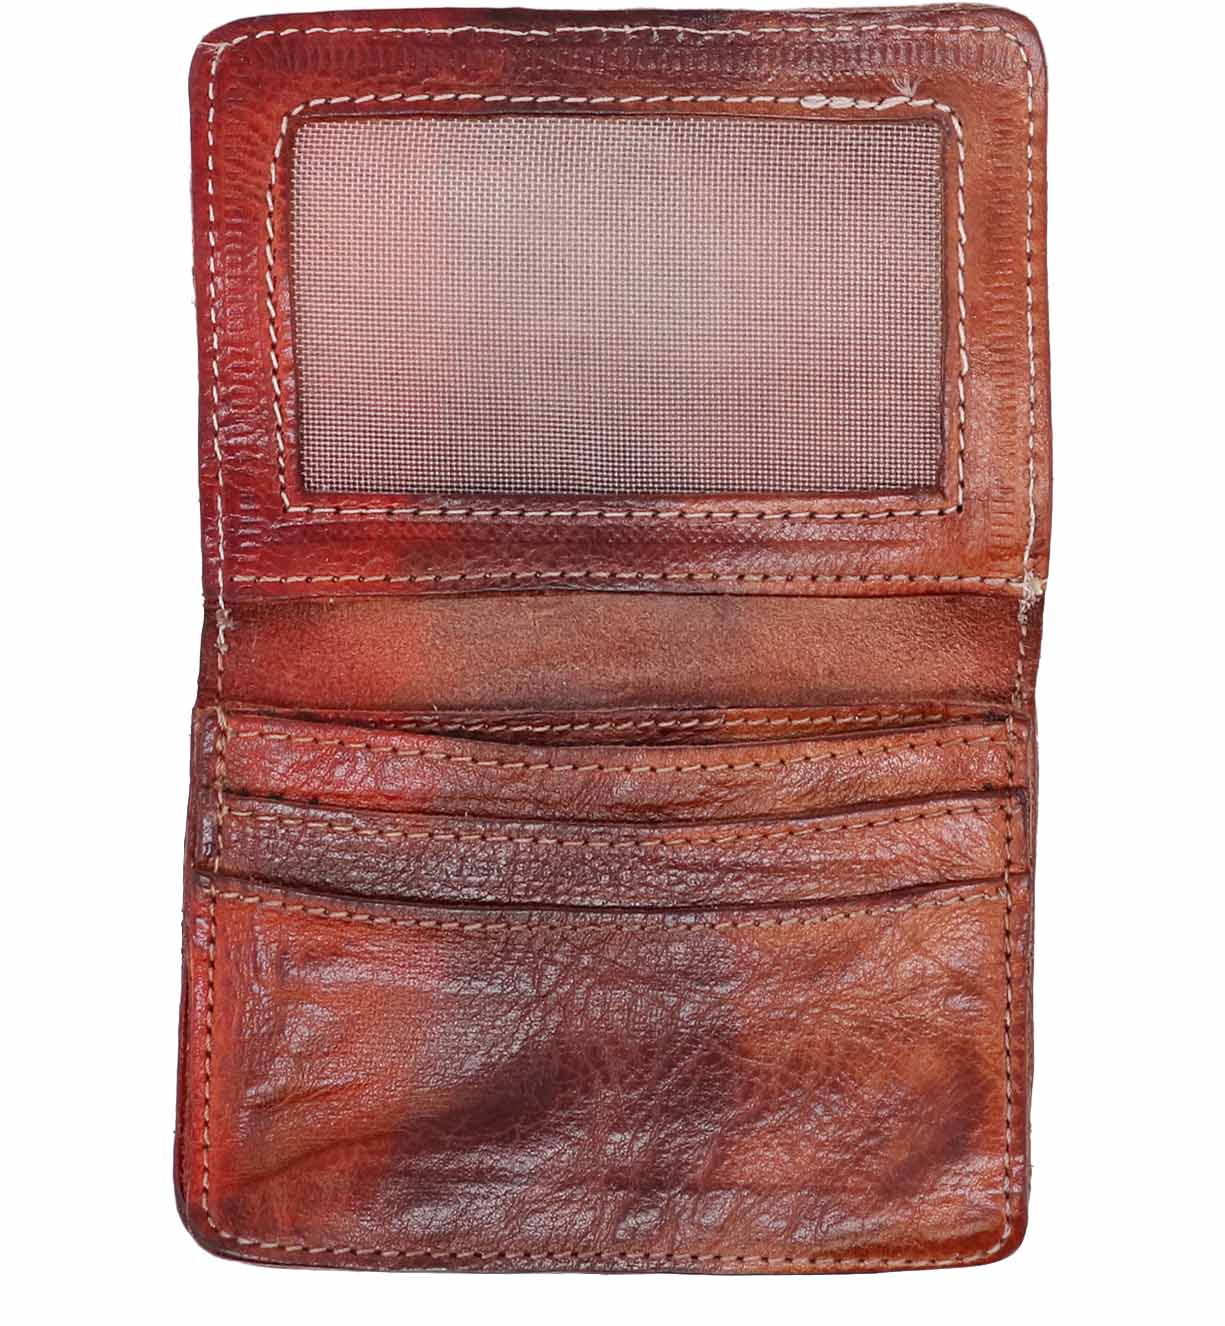 A brown leather Jeor wallet on a white background. Brand: Bed Stu.